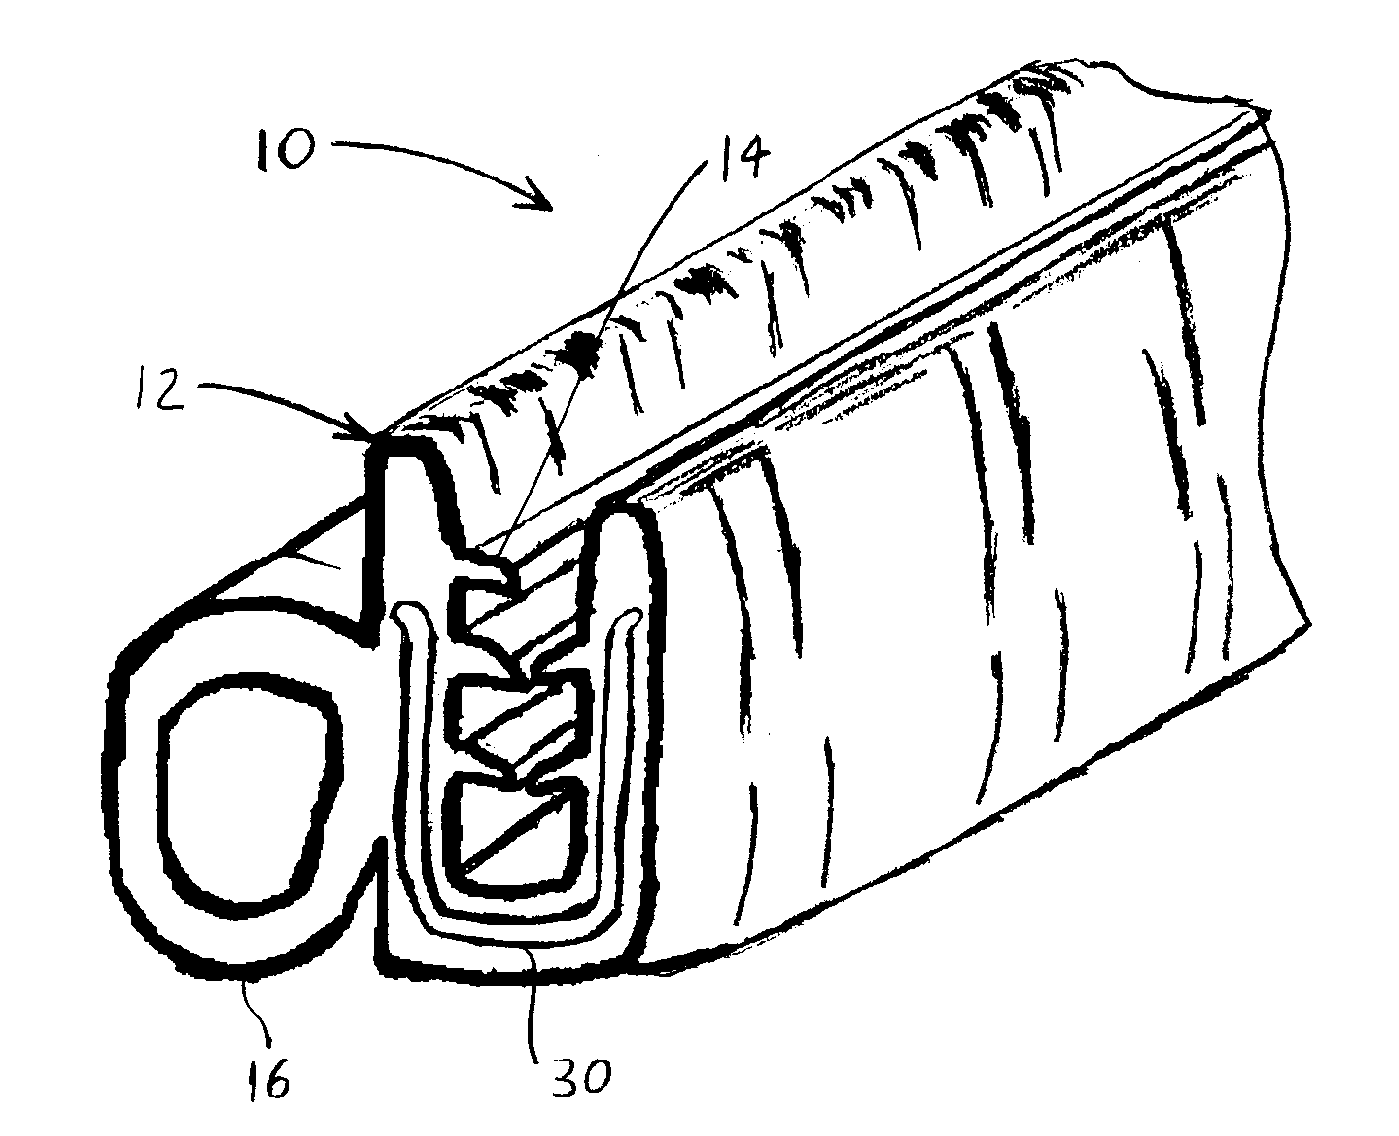 Coextruded polymer molding having selectively notched carrier